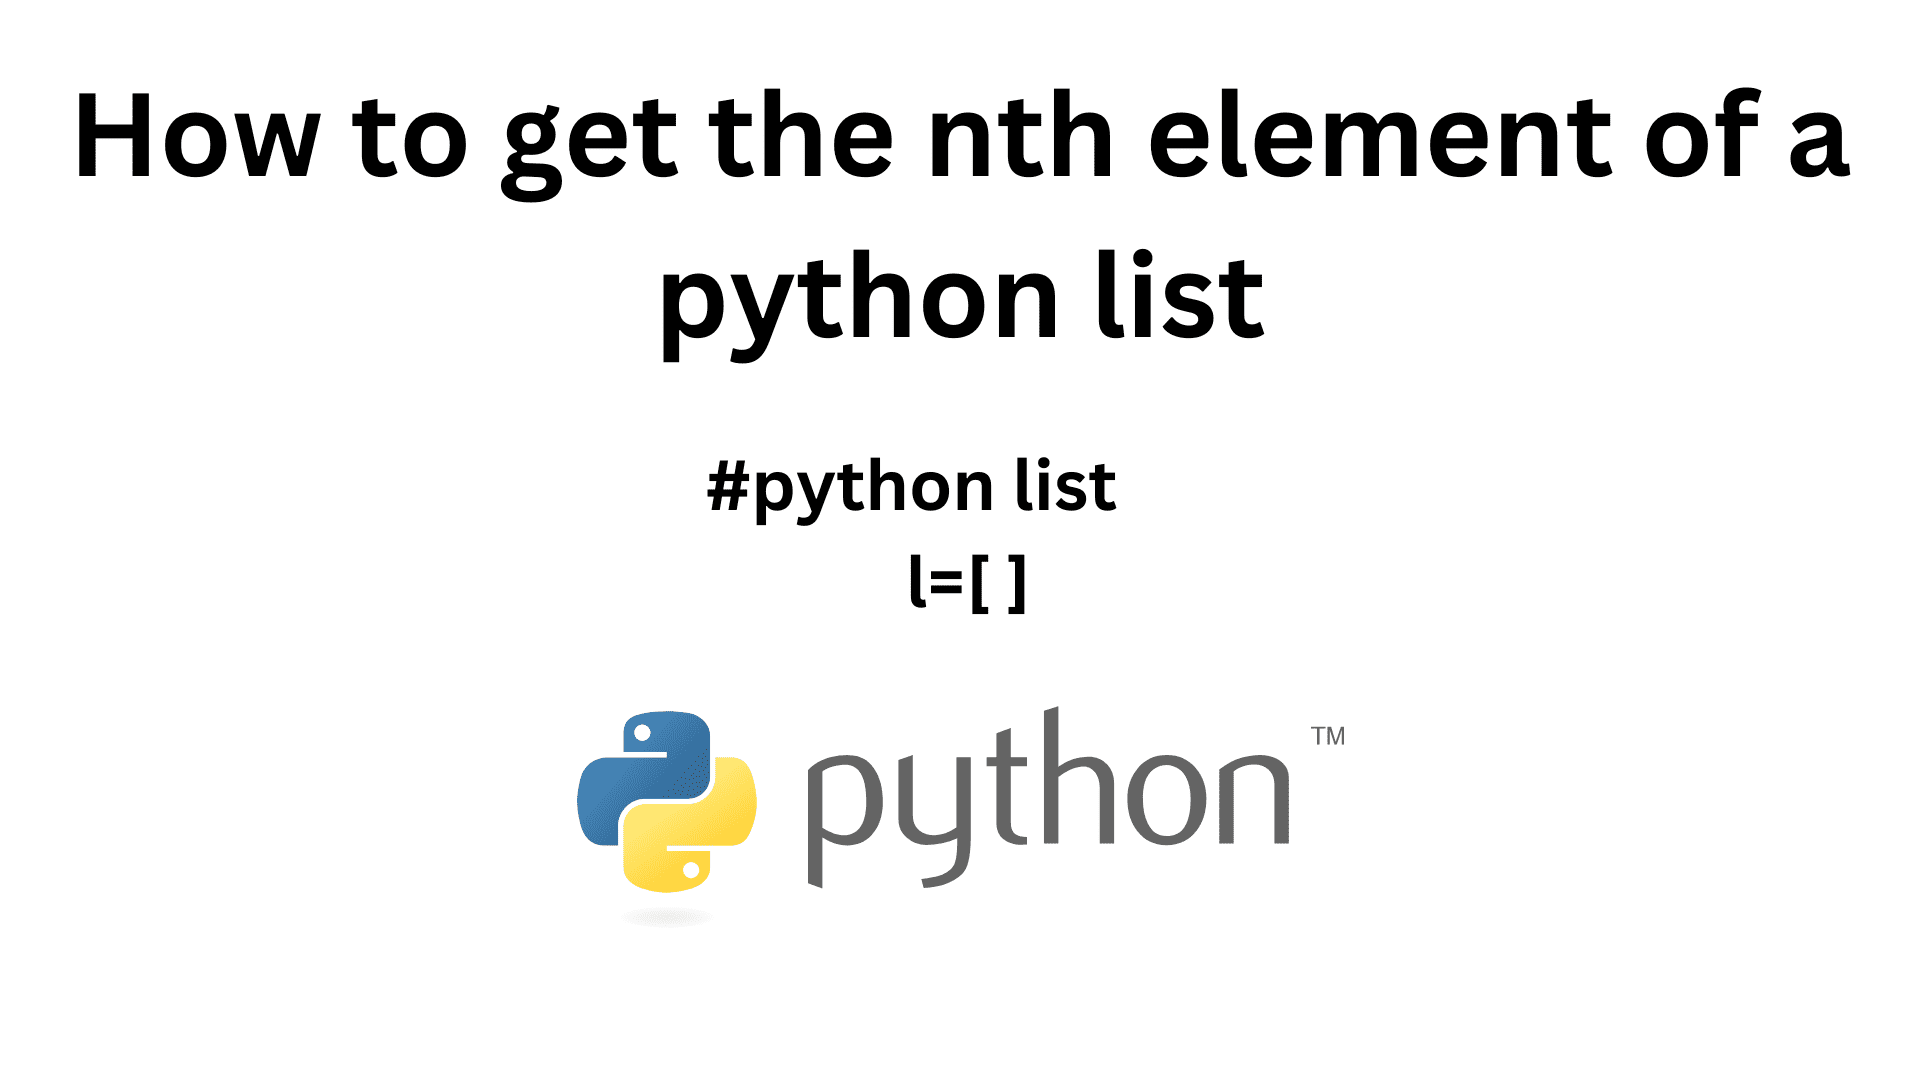 How to get the nth element of a python list